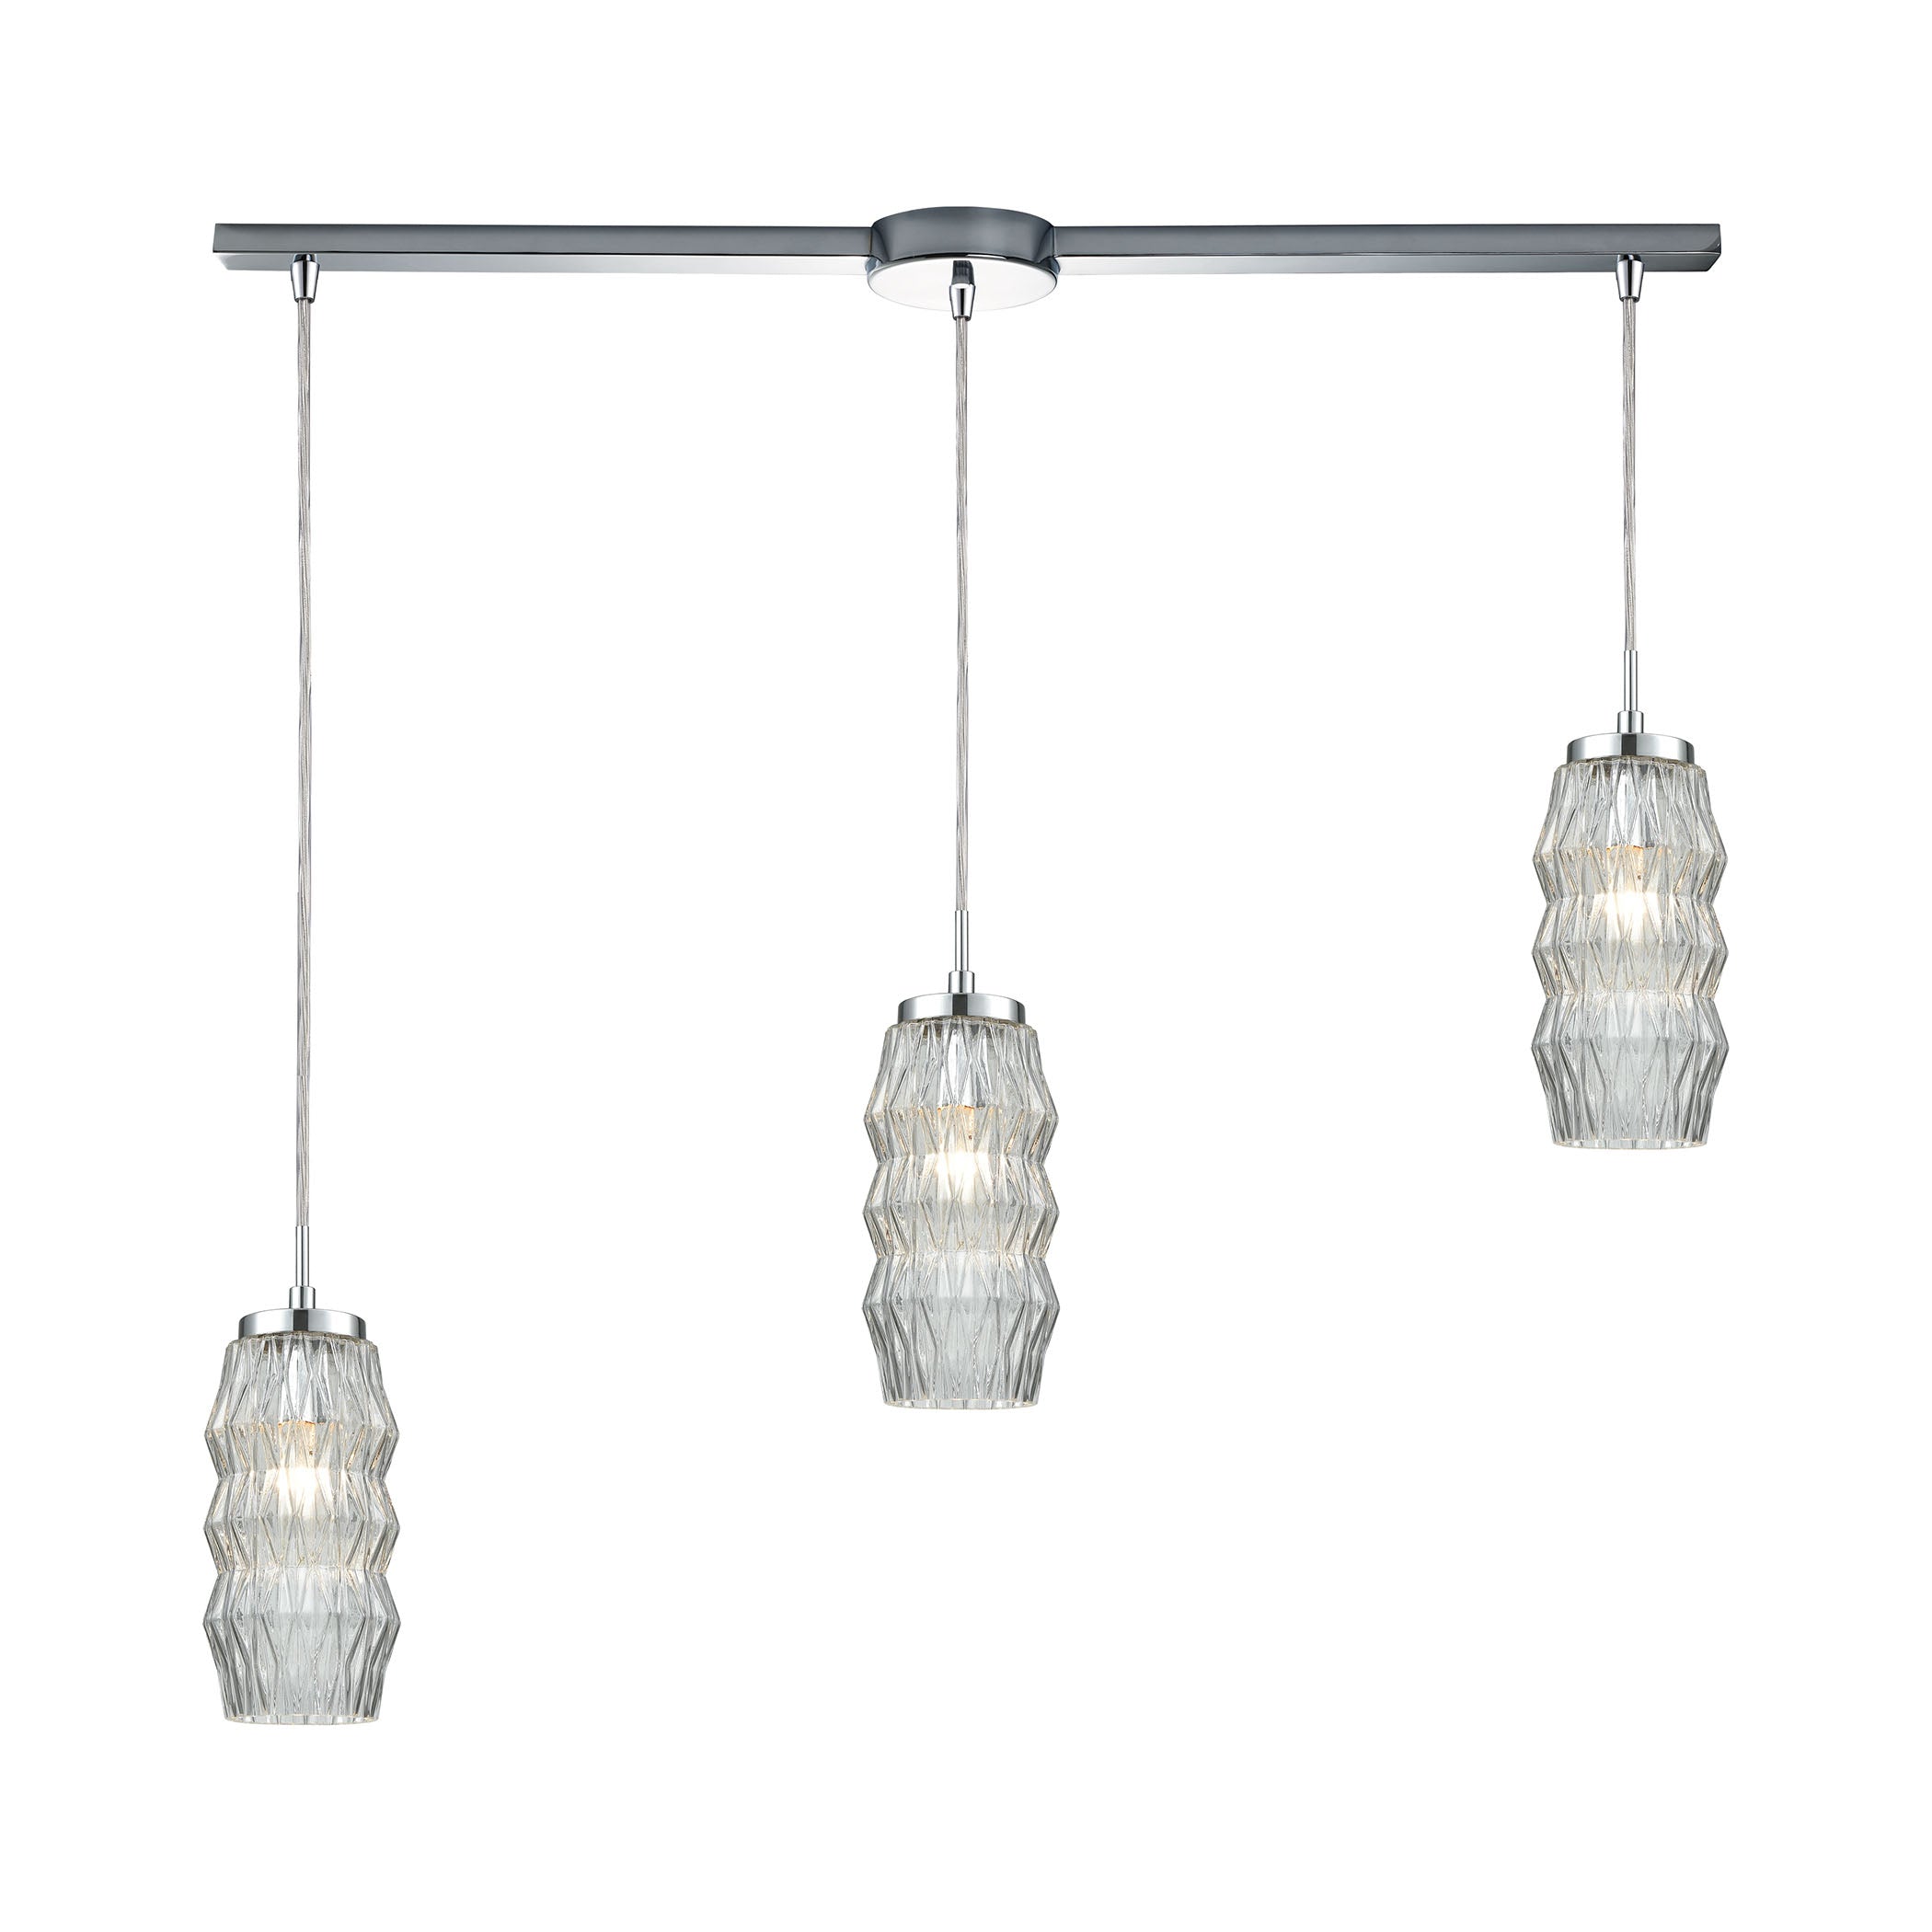 ELK Lighting 56650/3L Zigzag 3-Light Linear Mini Pendant Fixture in Polished Chrome with Clear Patterned Glass